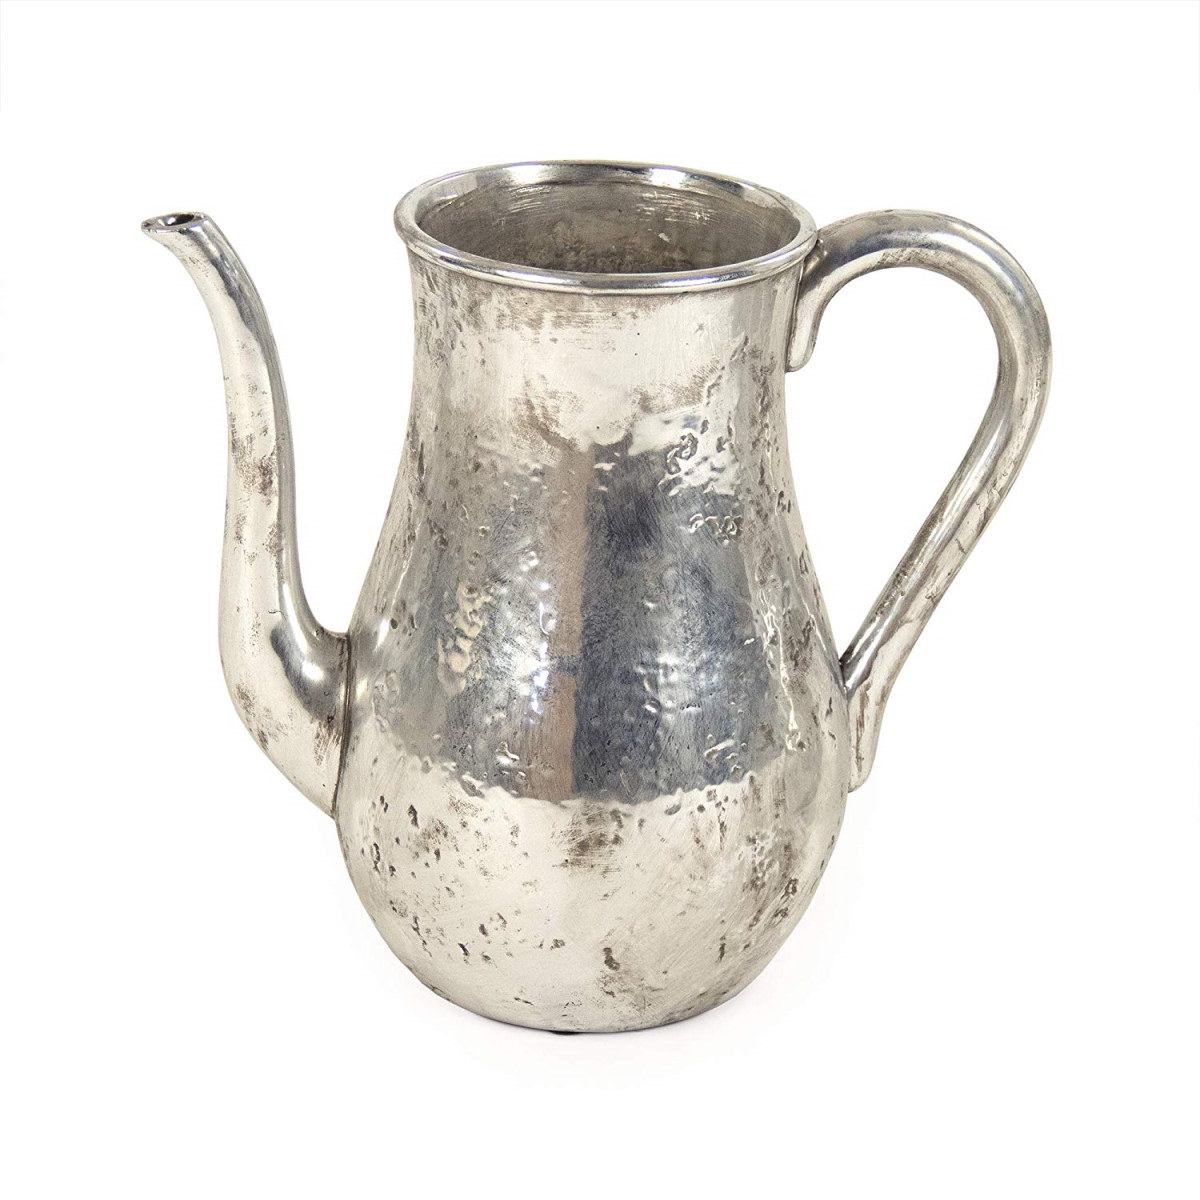 9824s A840 Distressed Metallic Pitcher, Small - Silver